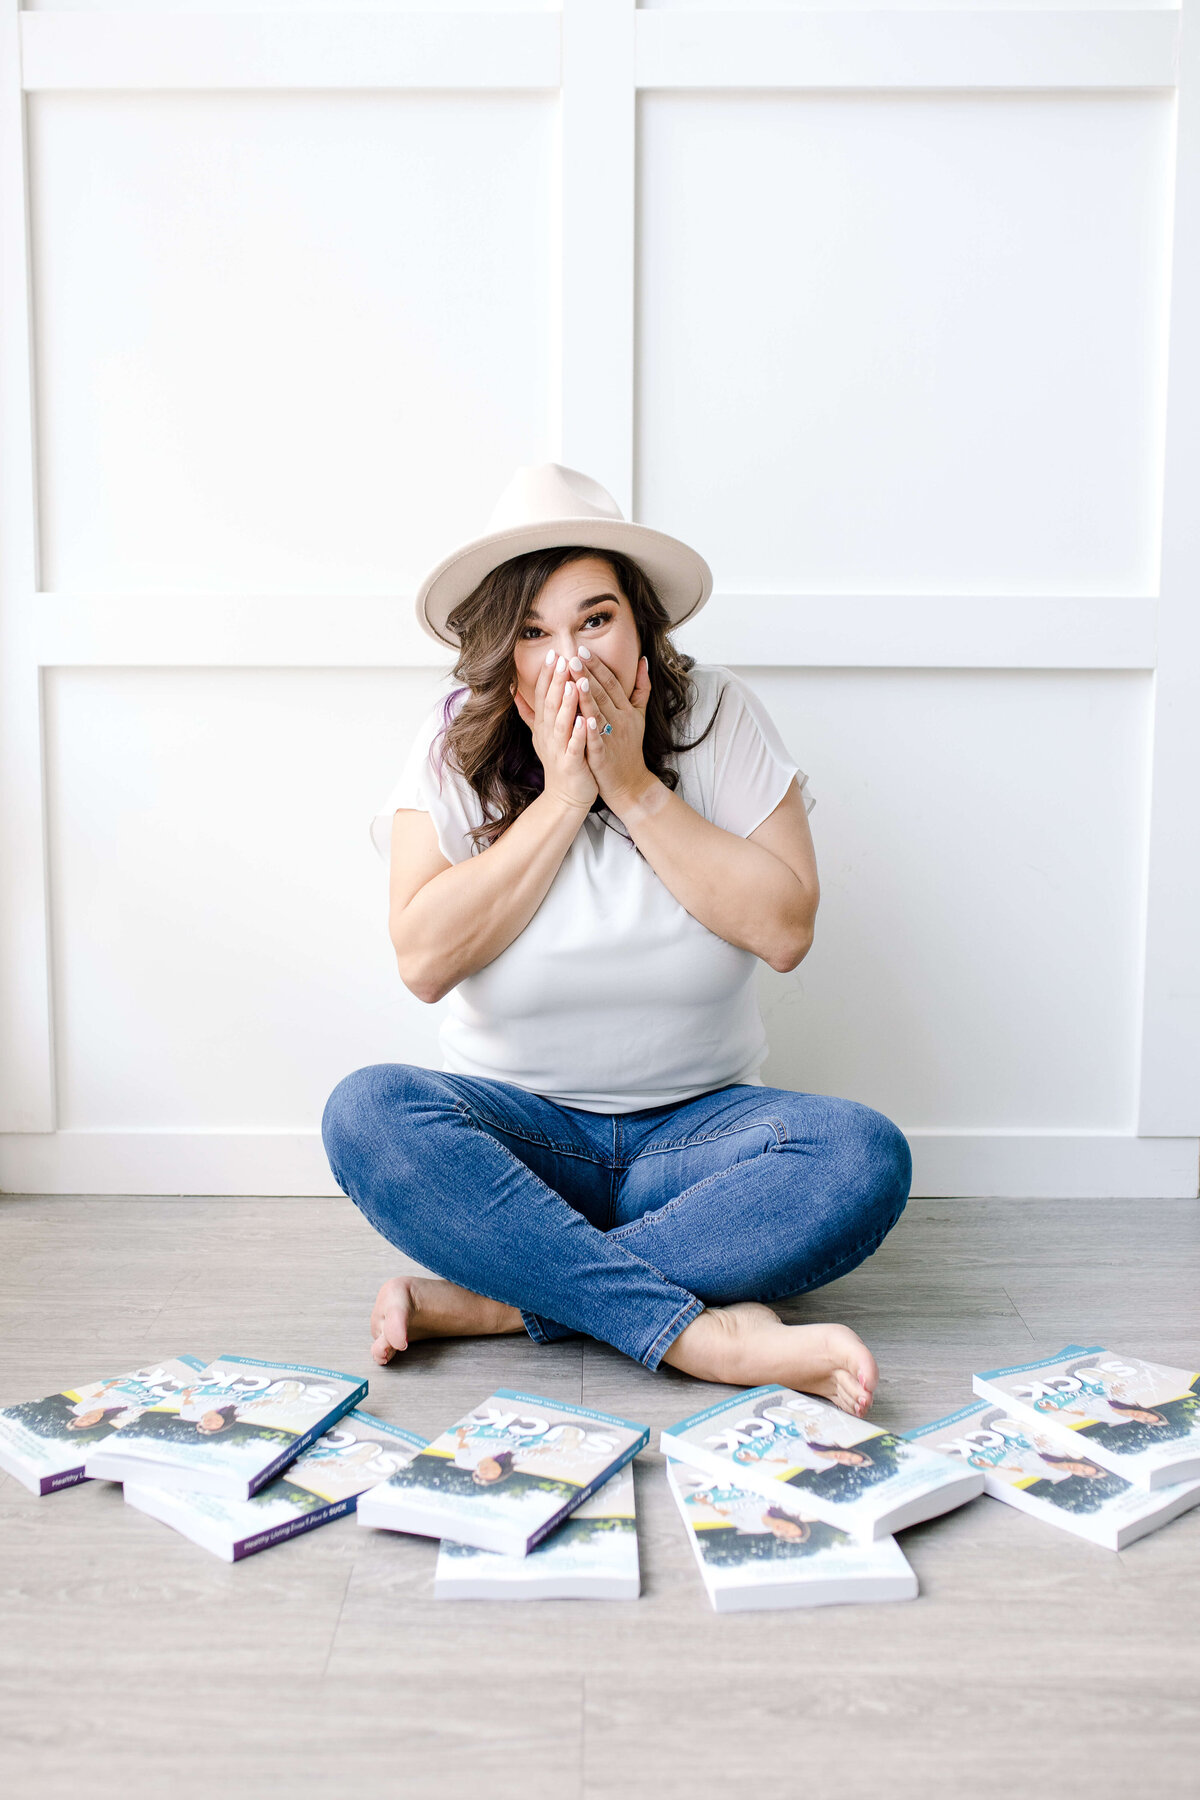 Brand photographer near me photographs woman sitting crisscross on the floor behind a pile of books she has published with her hands to her mouth and surprise for branding photo shoot ideas